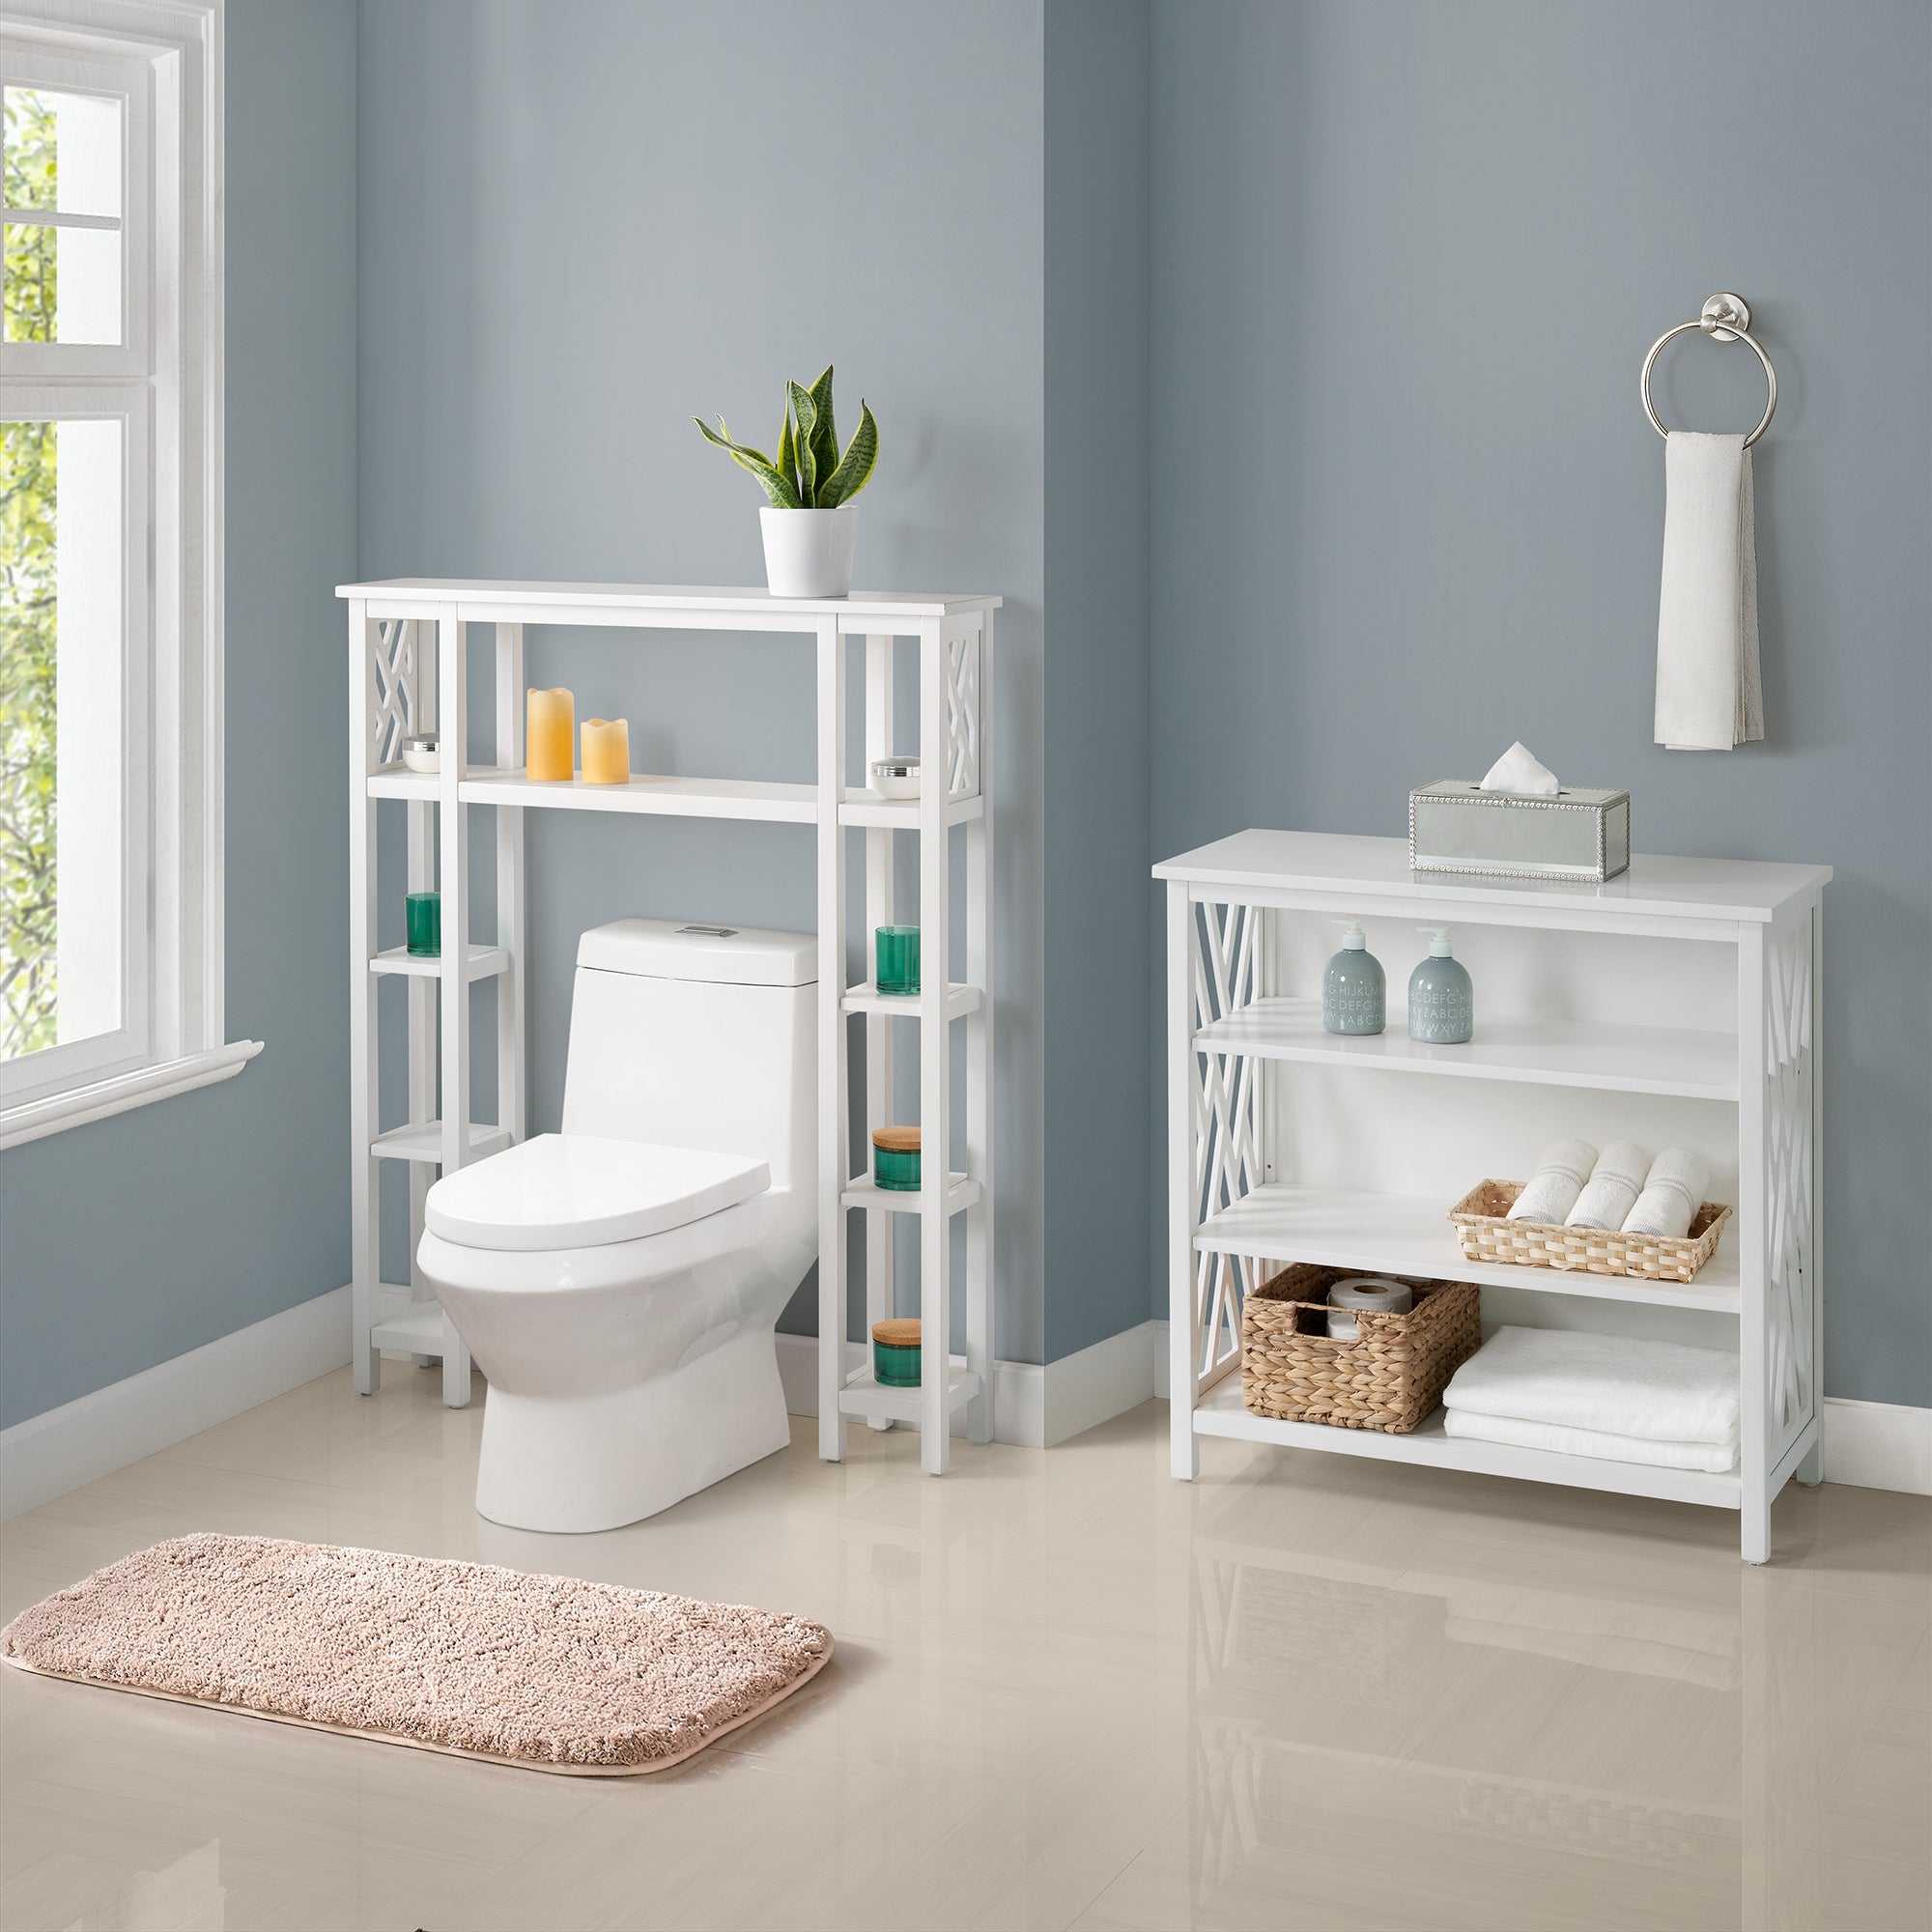 coventry over toilet open shelving unit with left and right side shelvesstorage and organization 379955